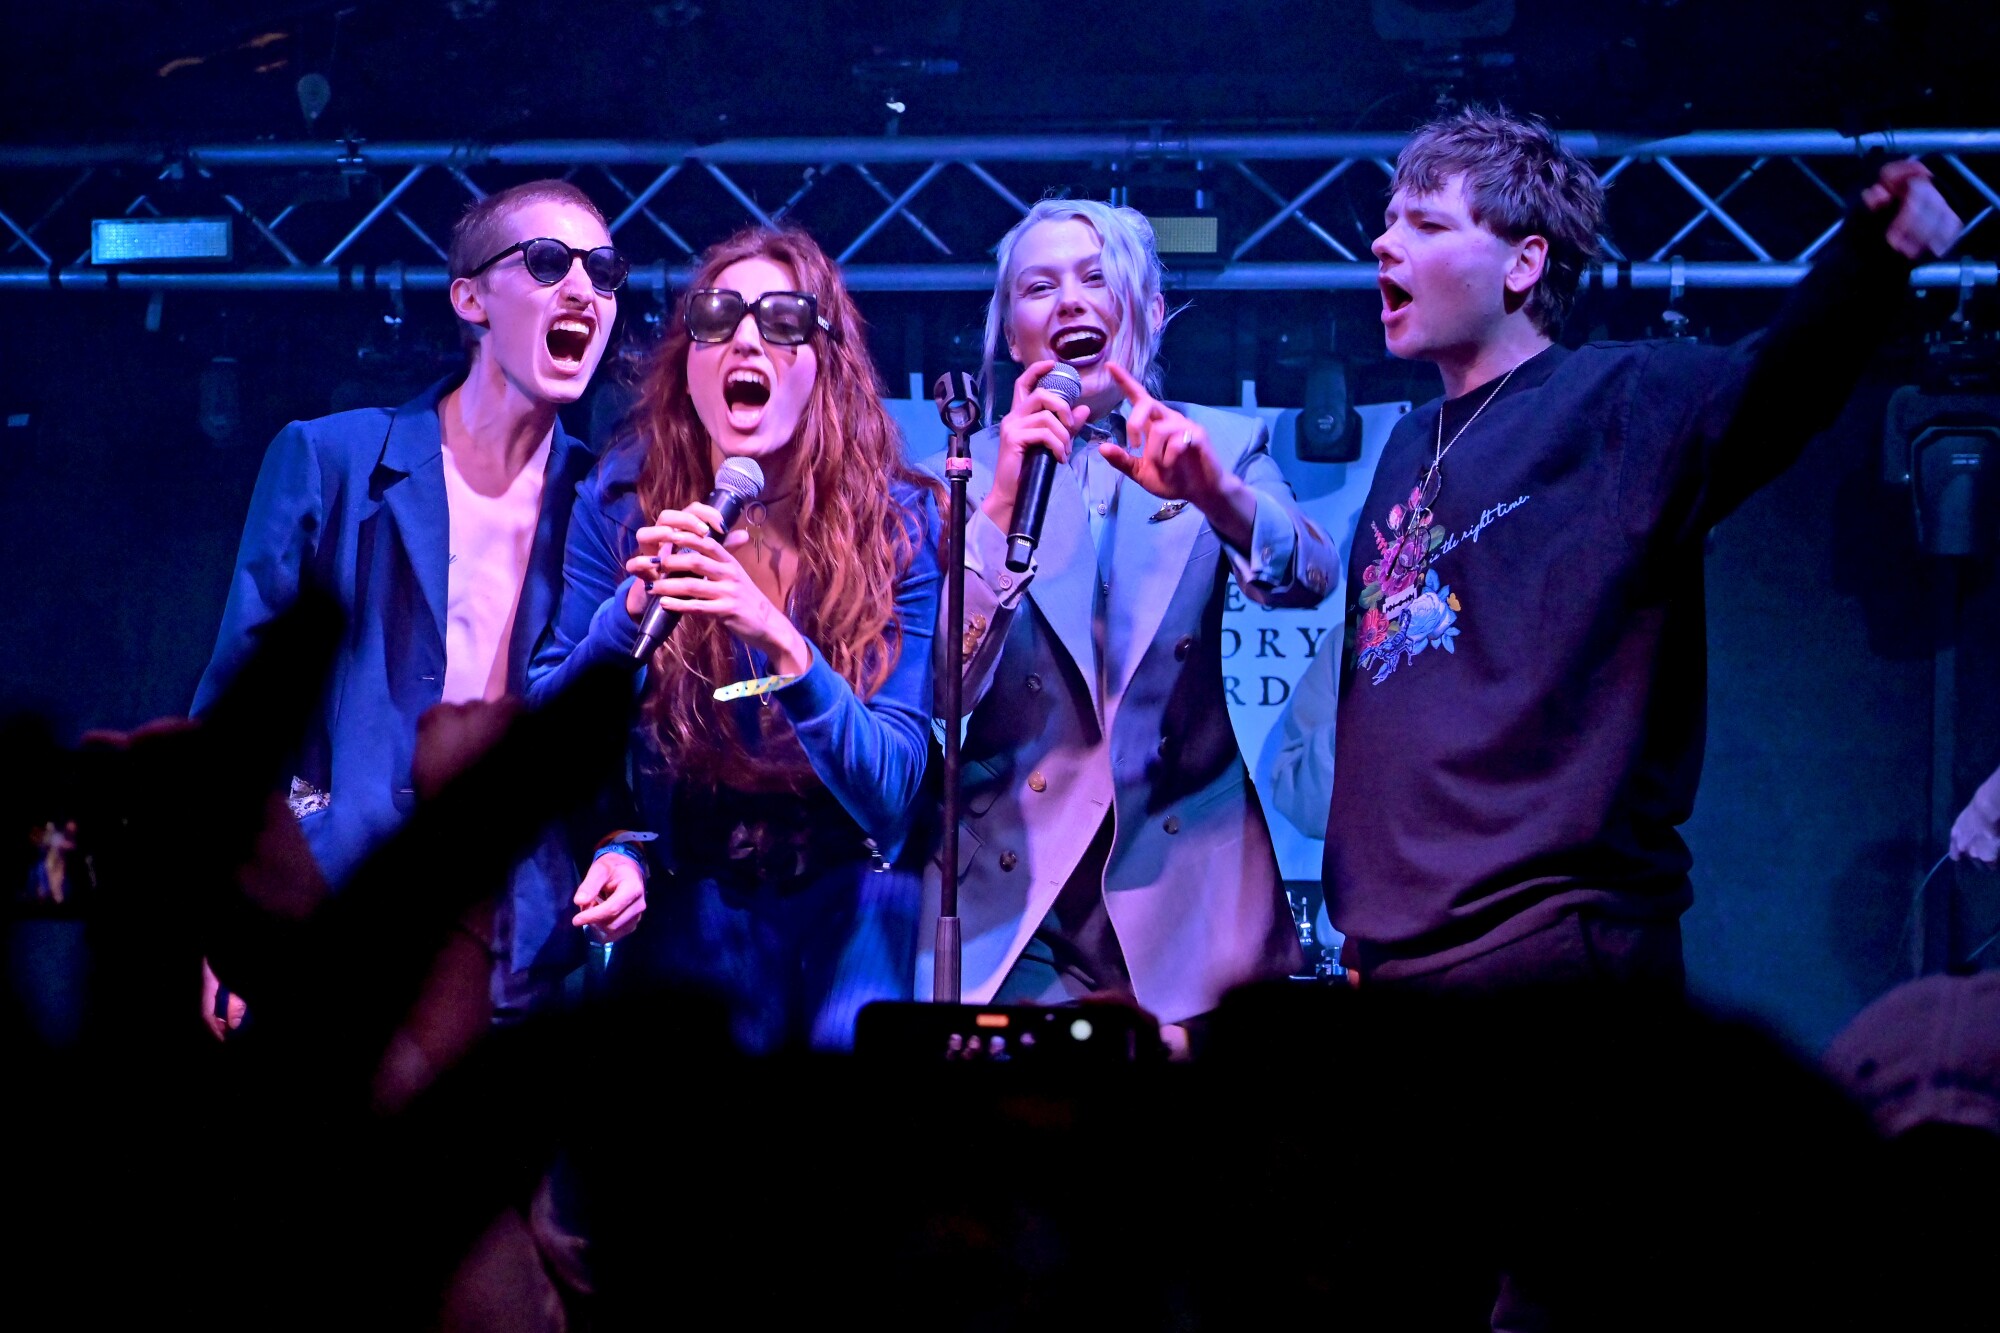 Four people singing together onstage.